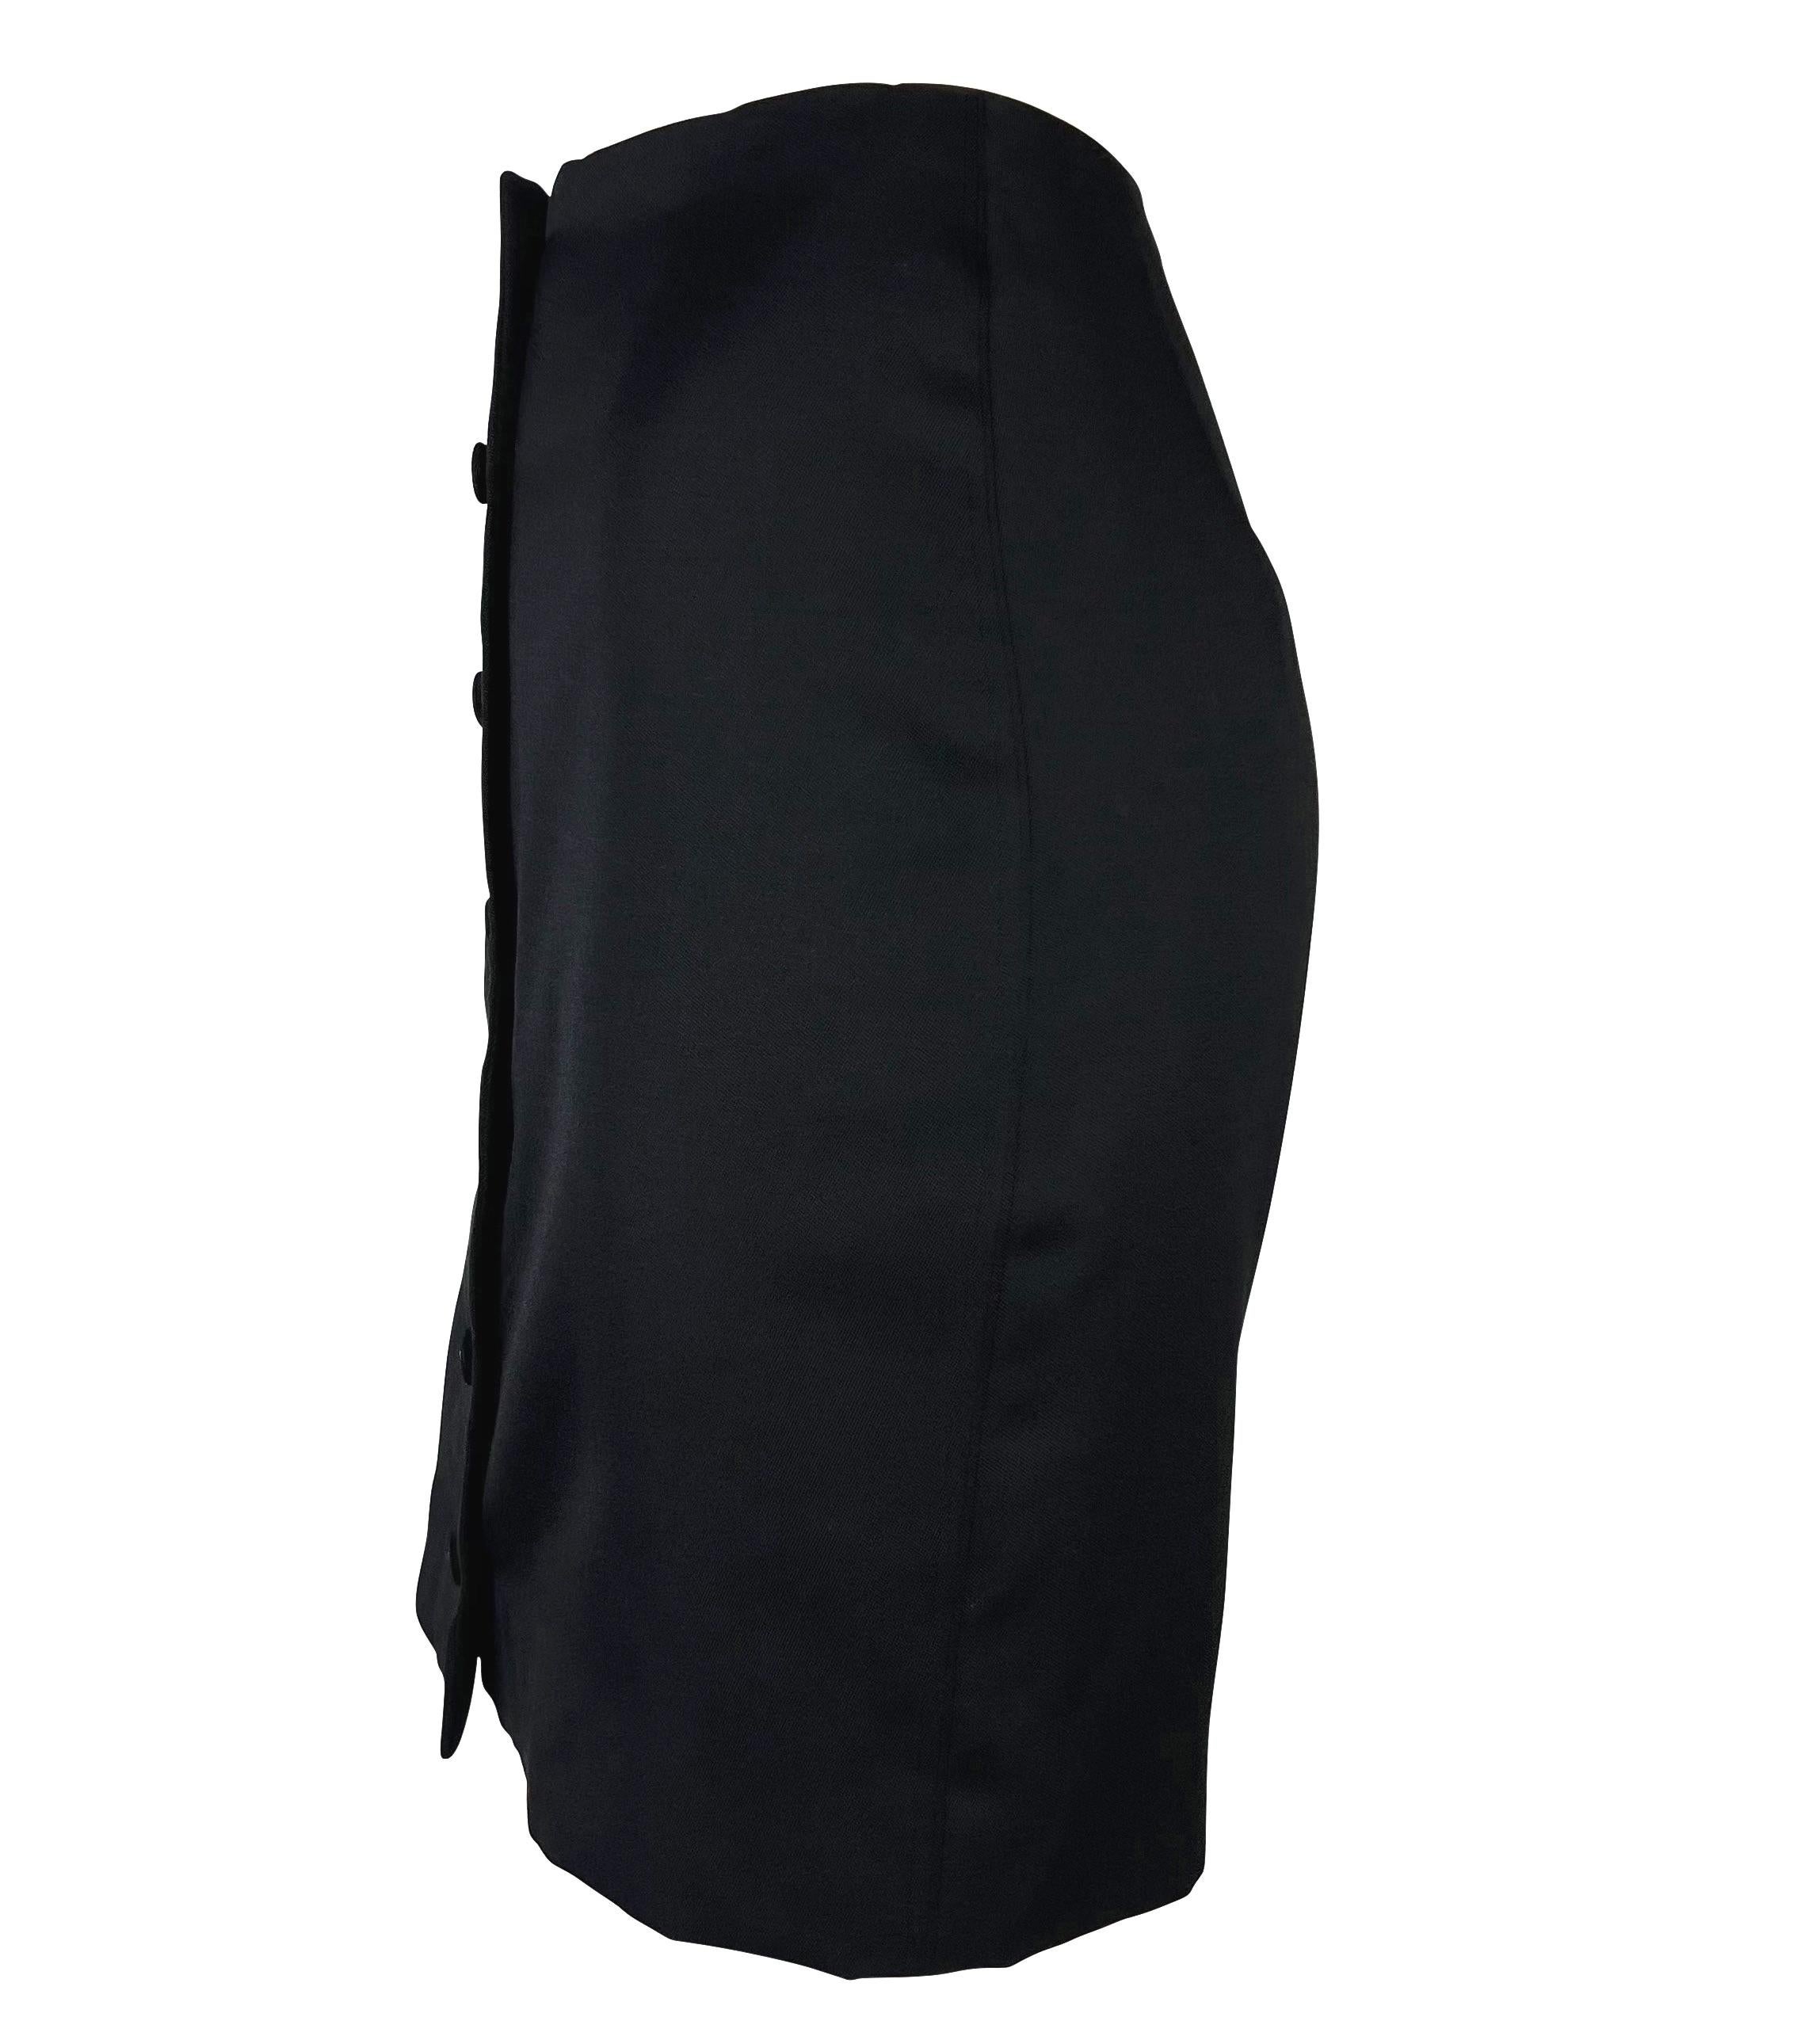 S/S 1996 Gianni Versace Couture Medusa Button Black Stretch Wool Mini Skirt In Excellent Condition For Sale In West Hollywood, CA